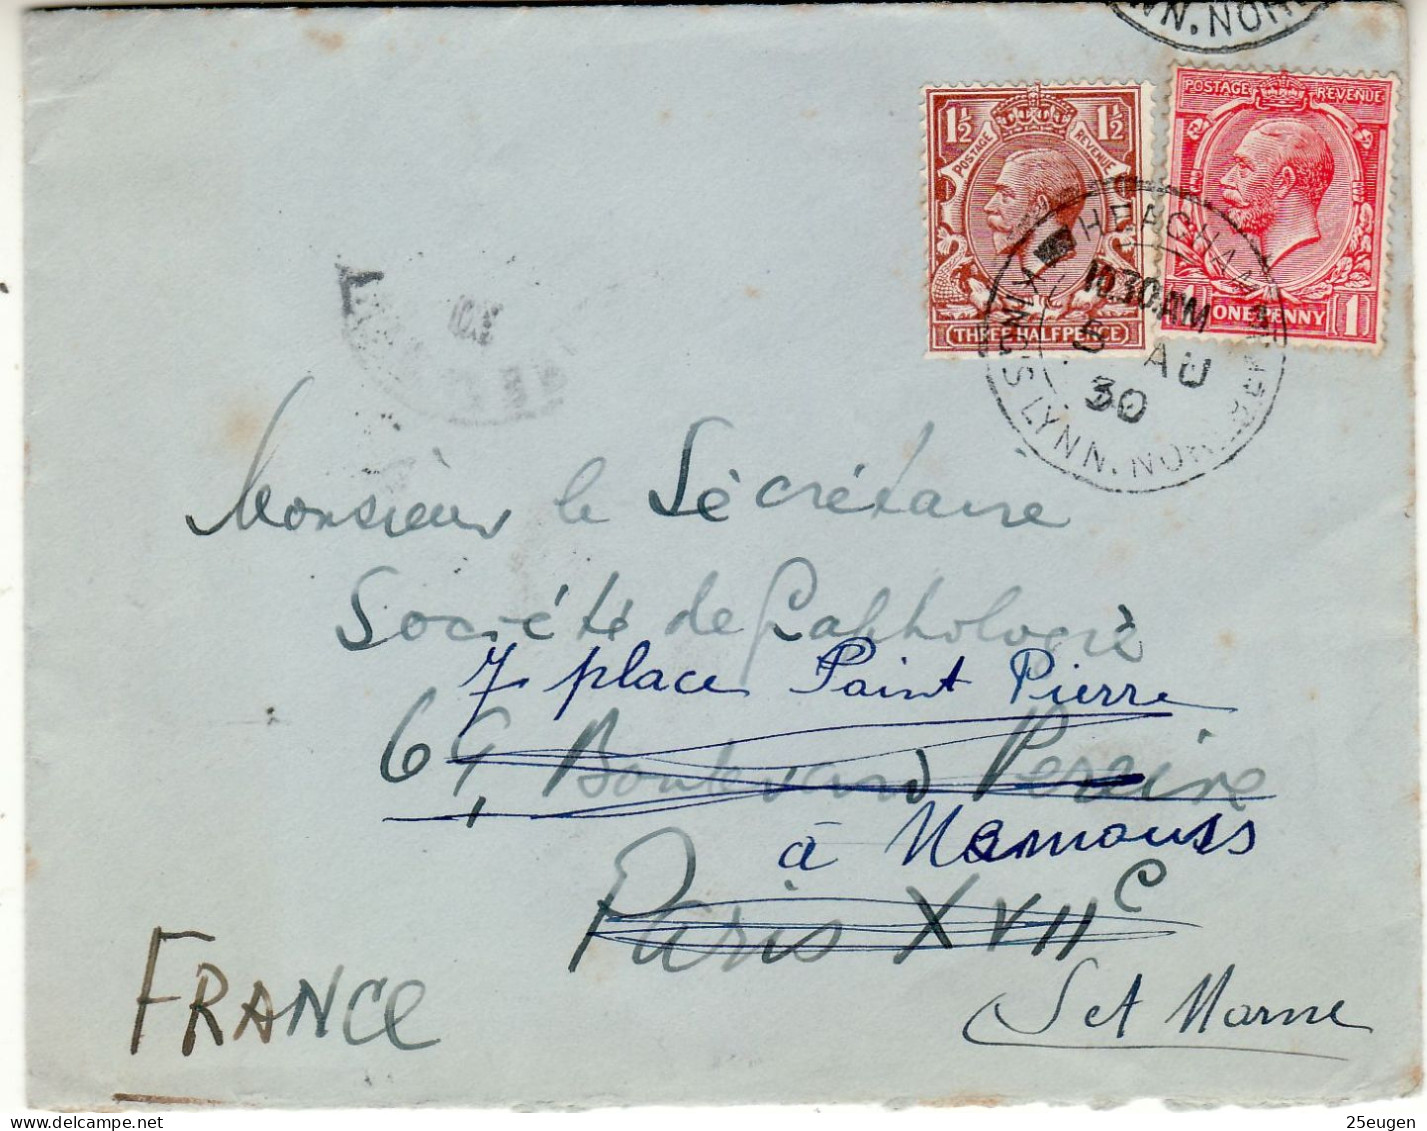 GREAT BRITAIN 1930 LETTER SENT FROM HEACHAM TO PARIS - Covers & Documents